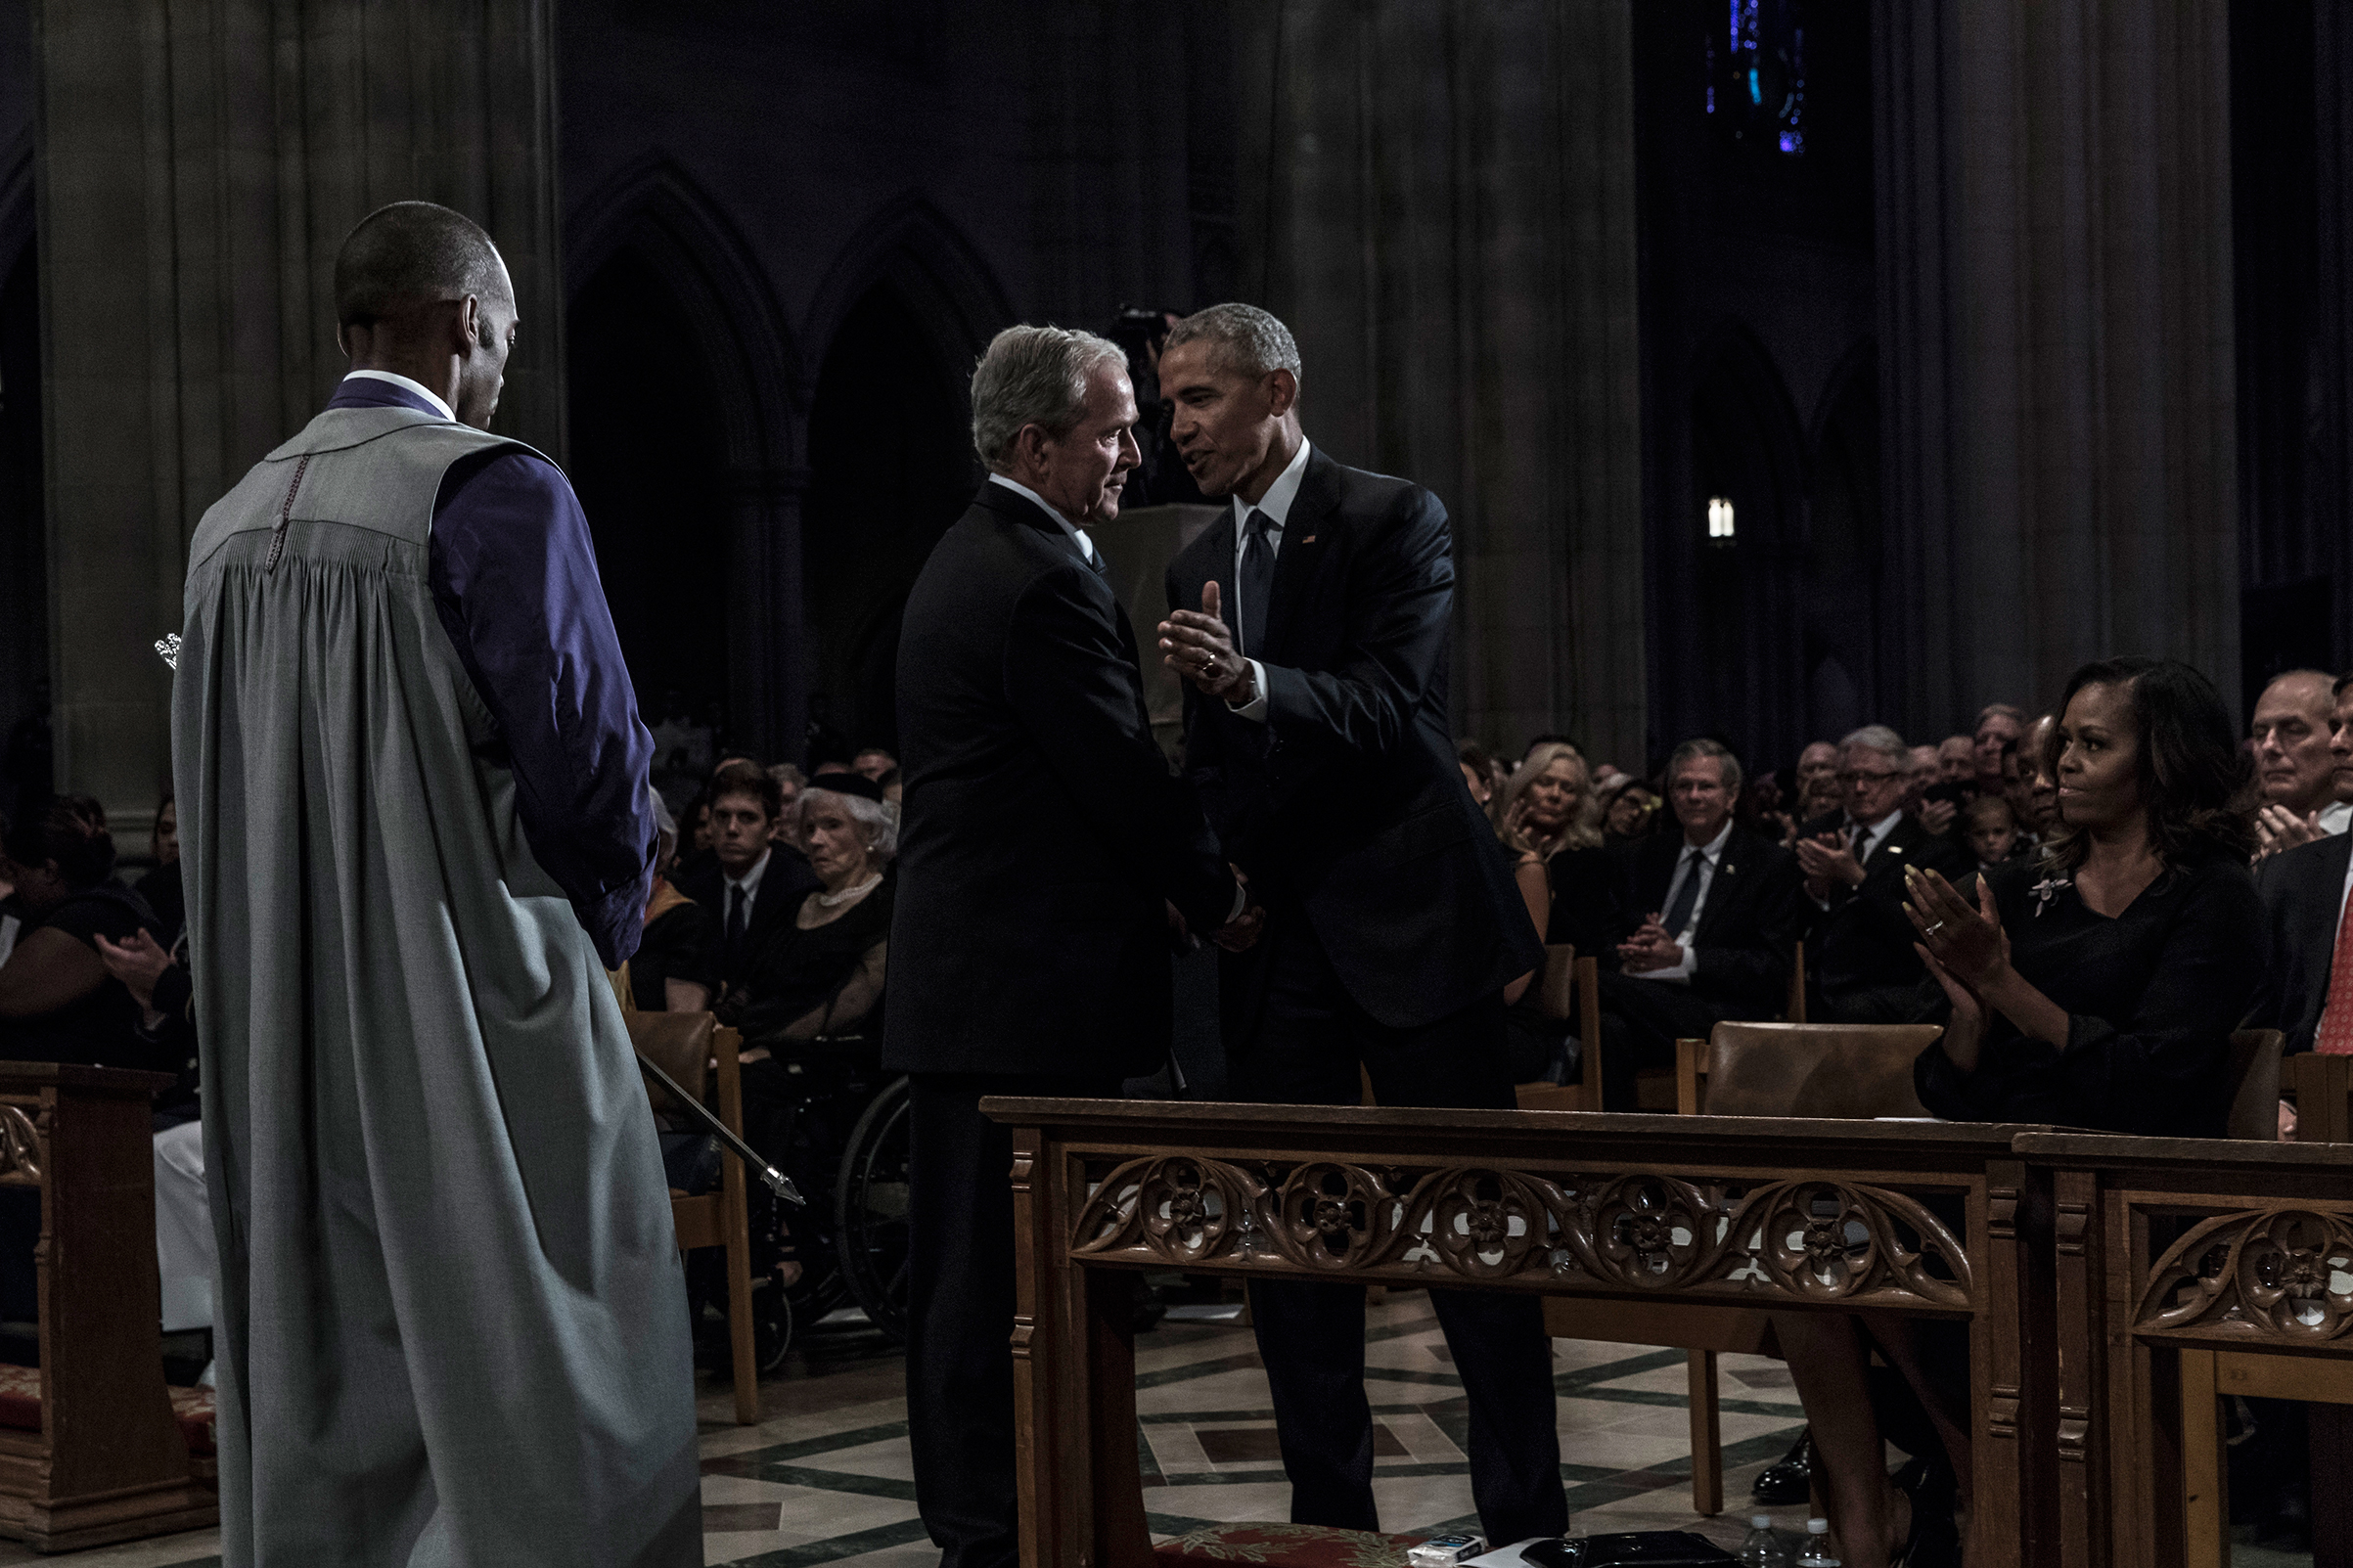 Former US Presidents Barack Obama, and George W. Bush during a memorial service for Senator John McCain at the Washington National Cathedral on September 1, 2018. (Christopher Morris—VII for TIME)